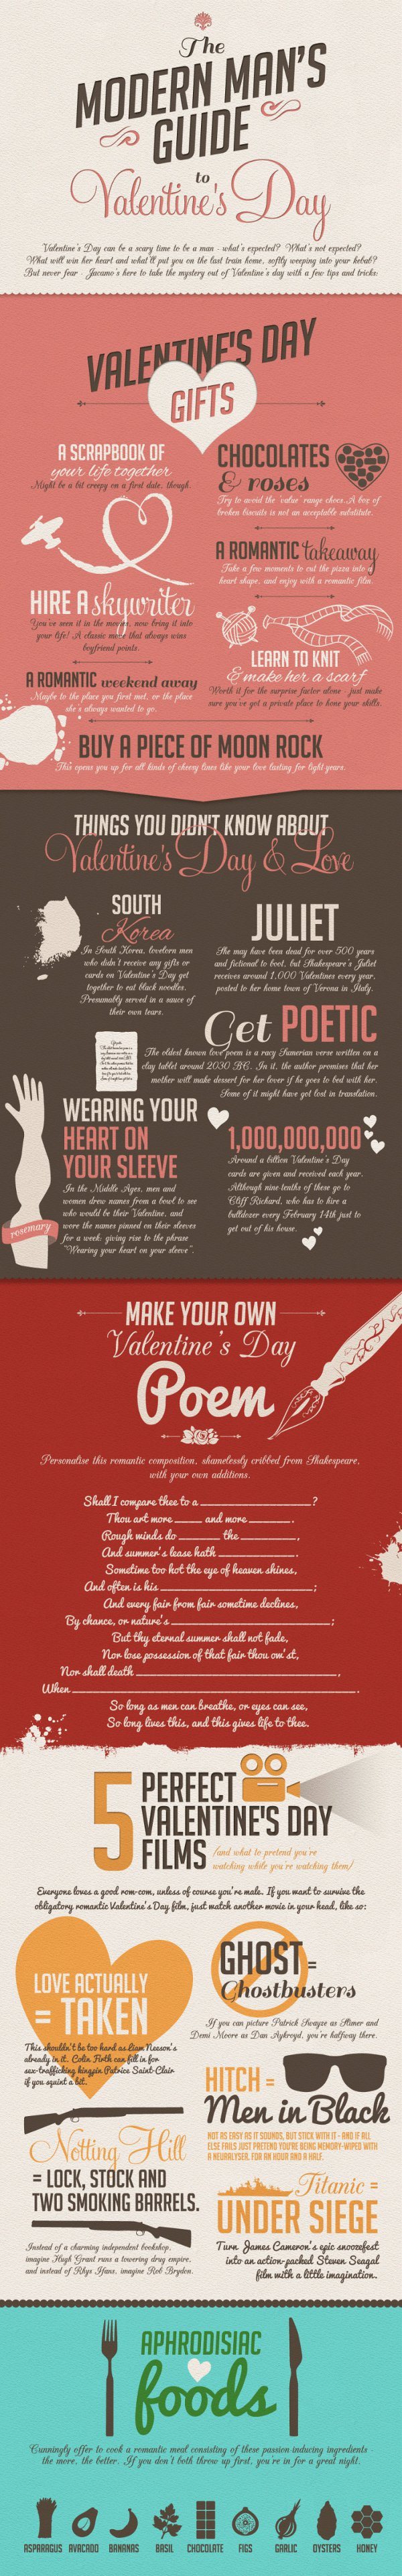 guide-to-valentines-day